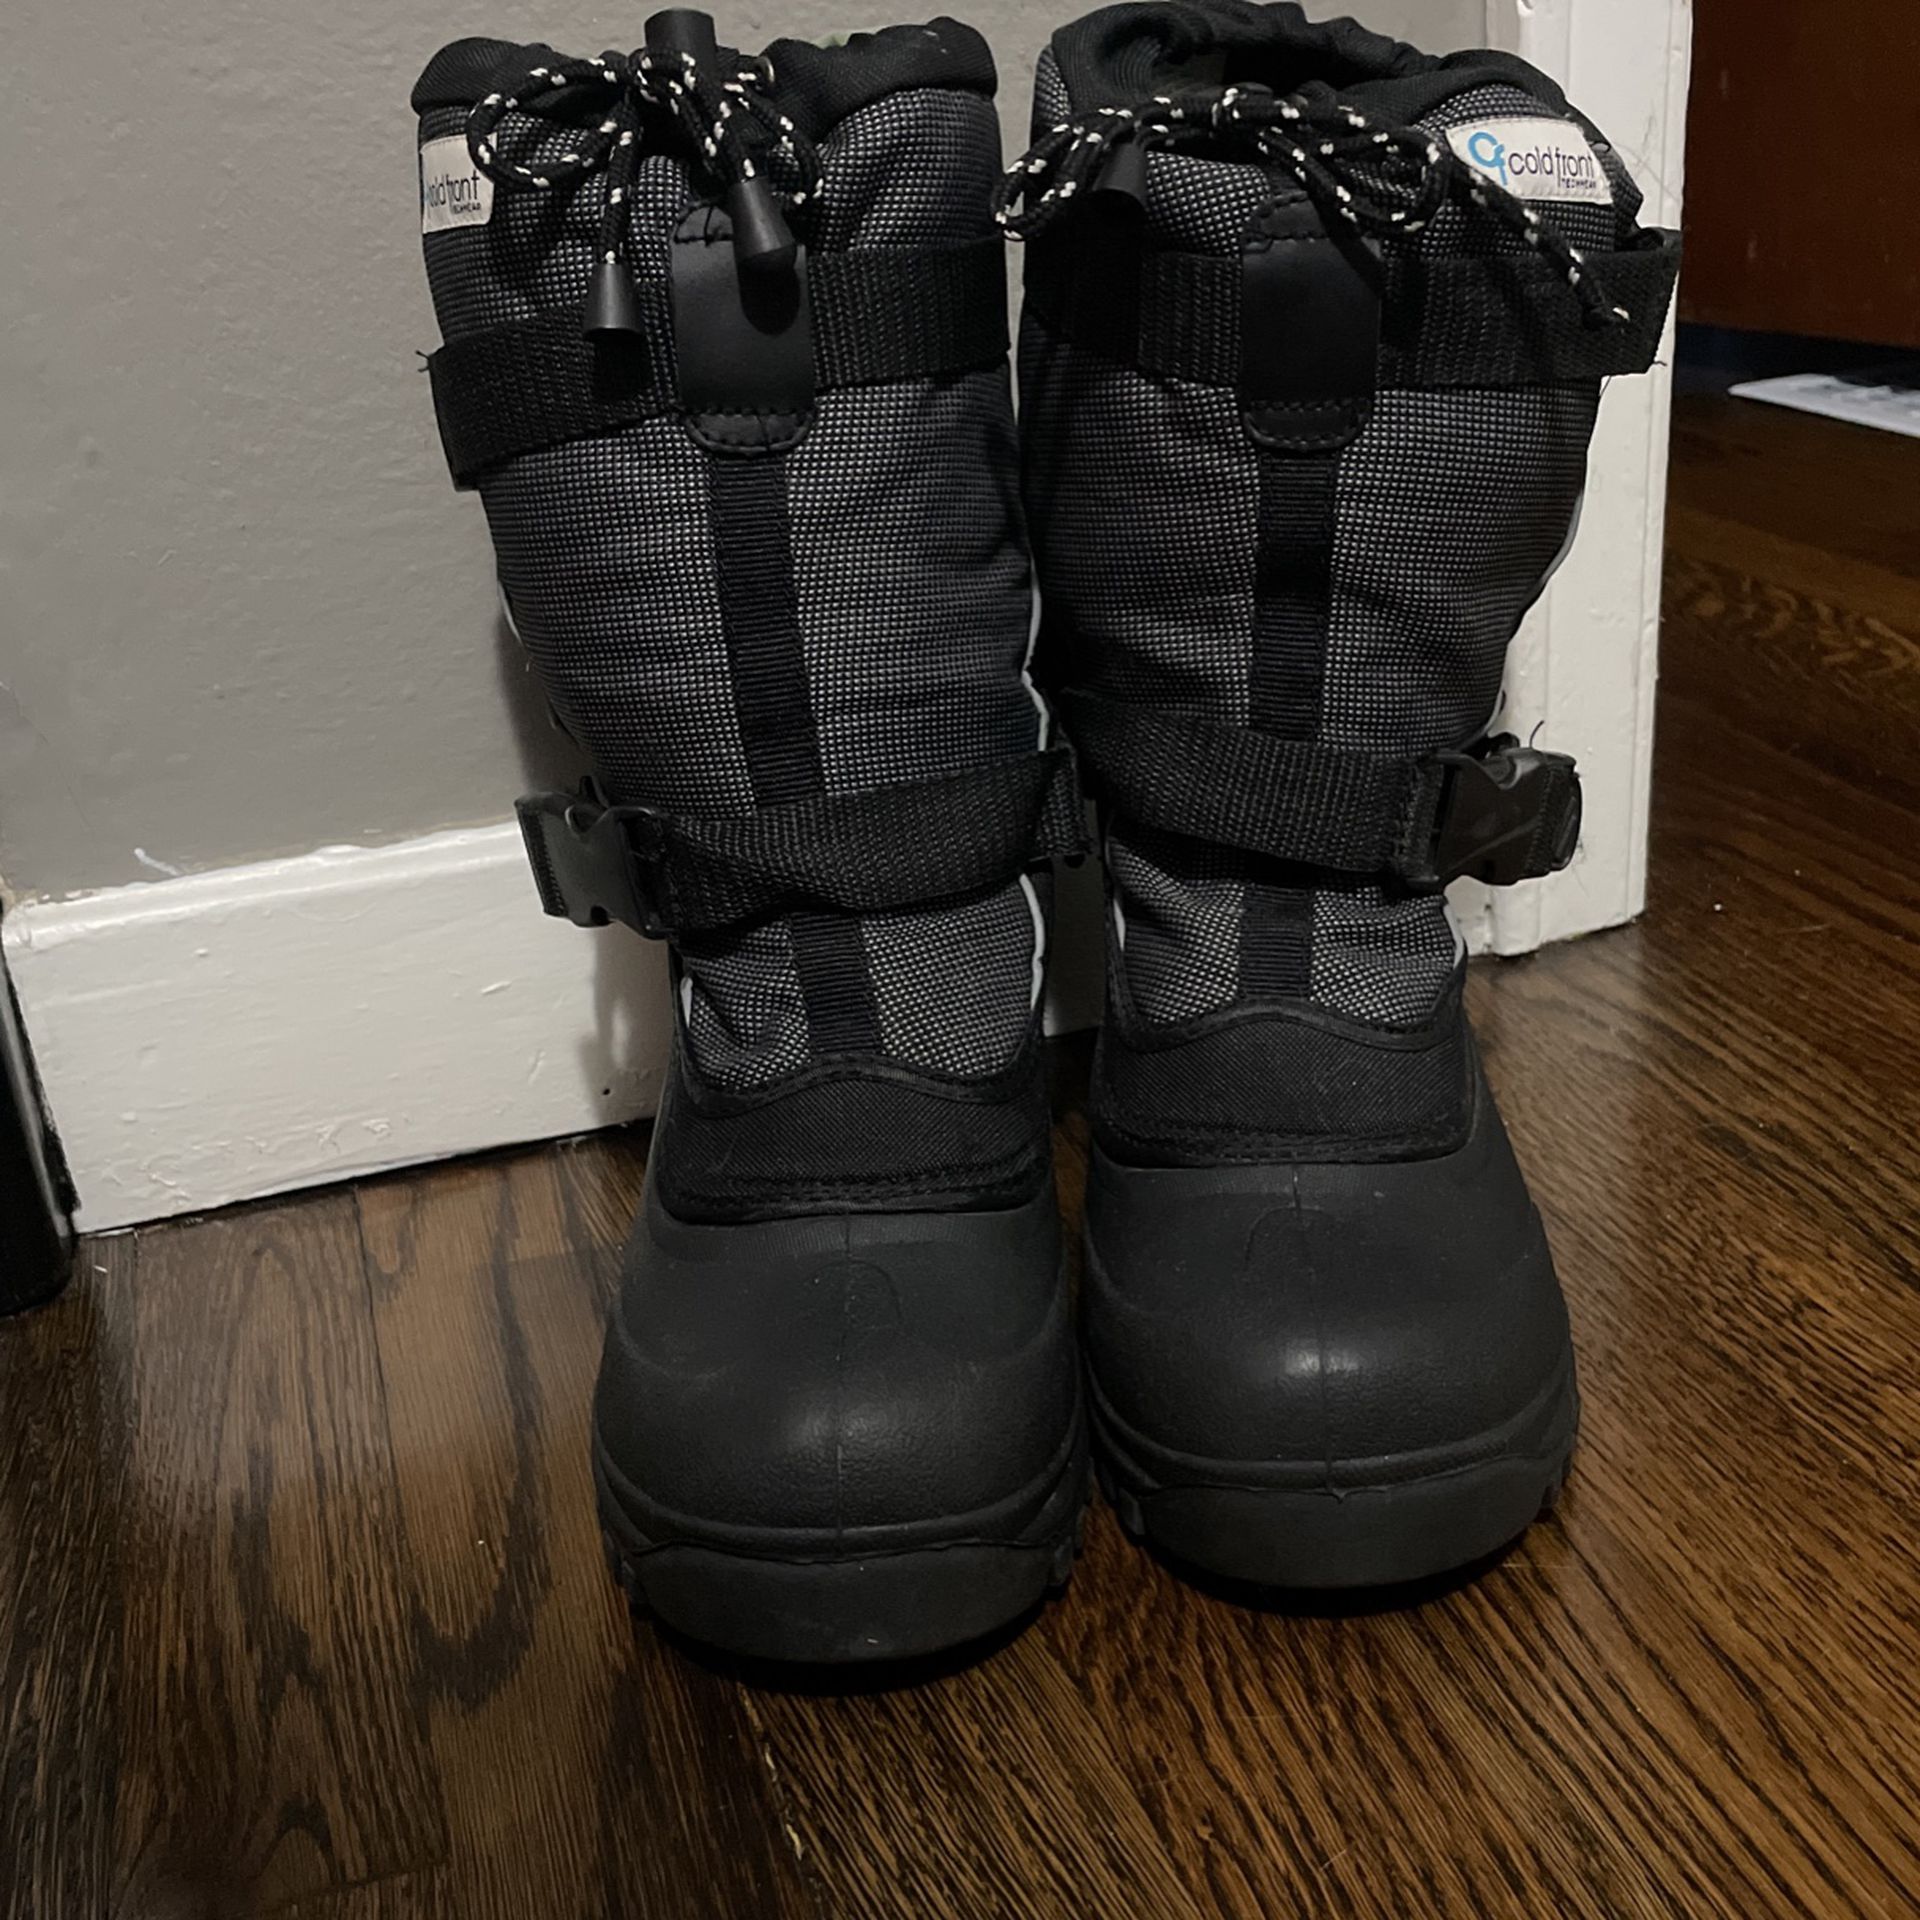 Cold front Tec Wear Winter Boots Size 7